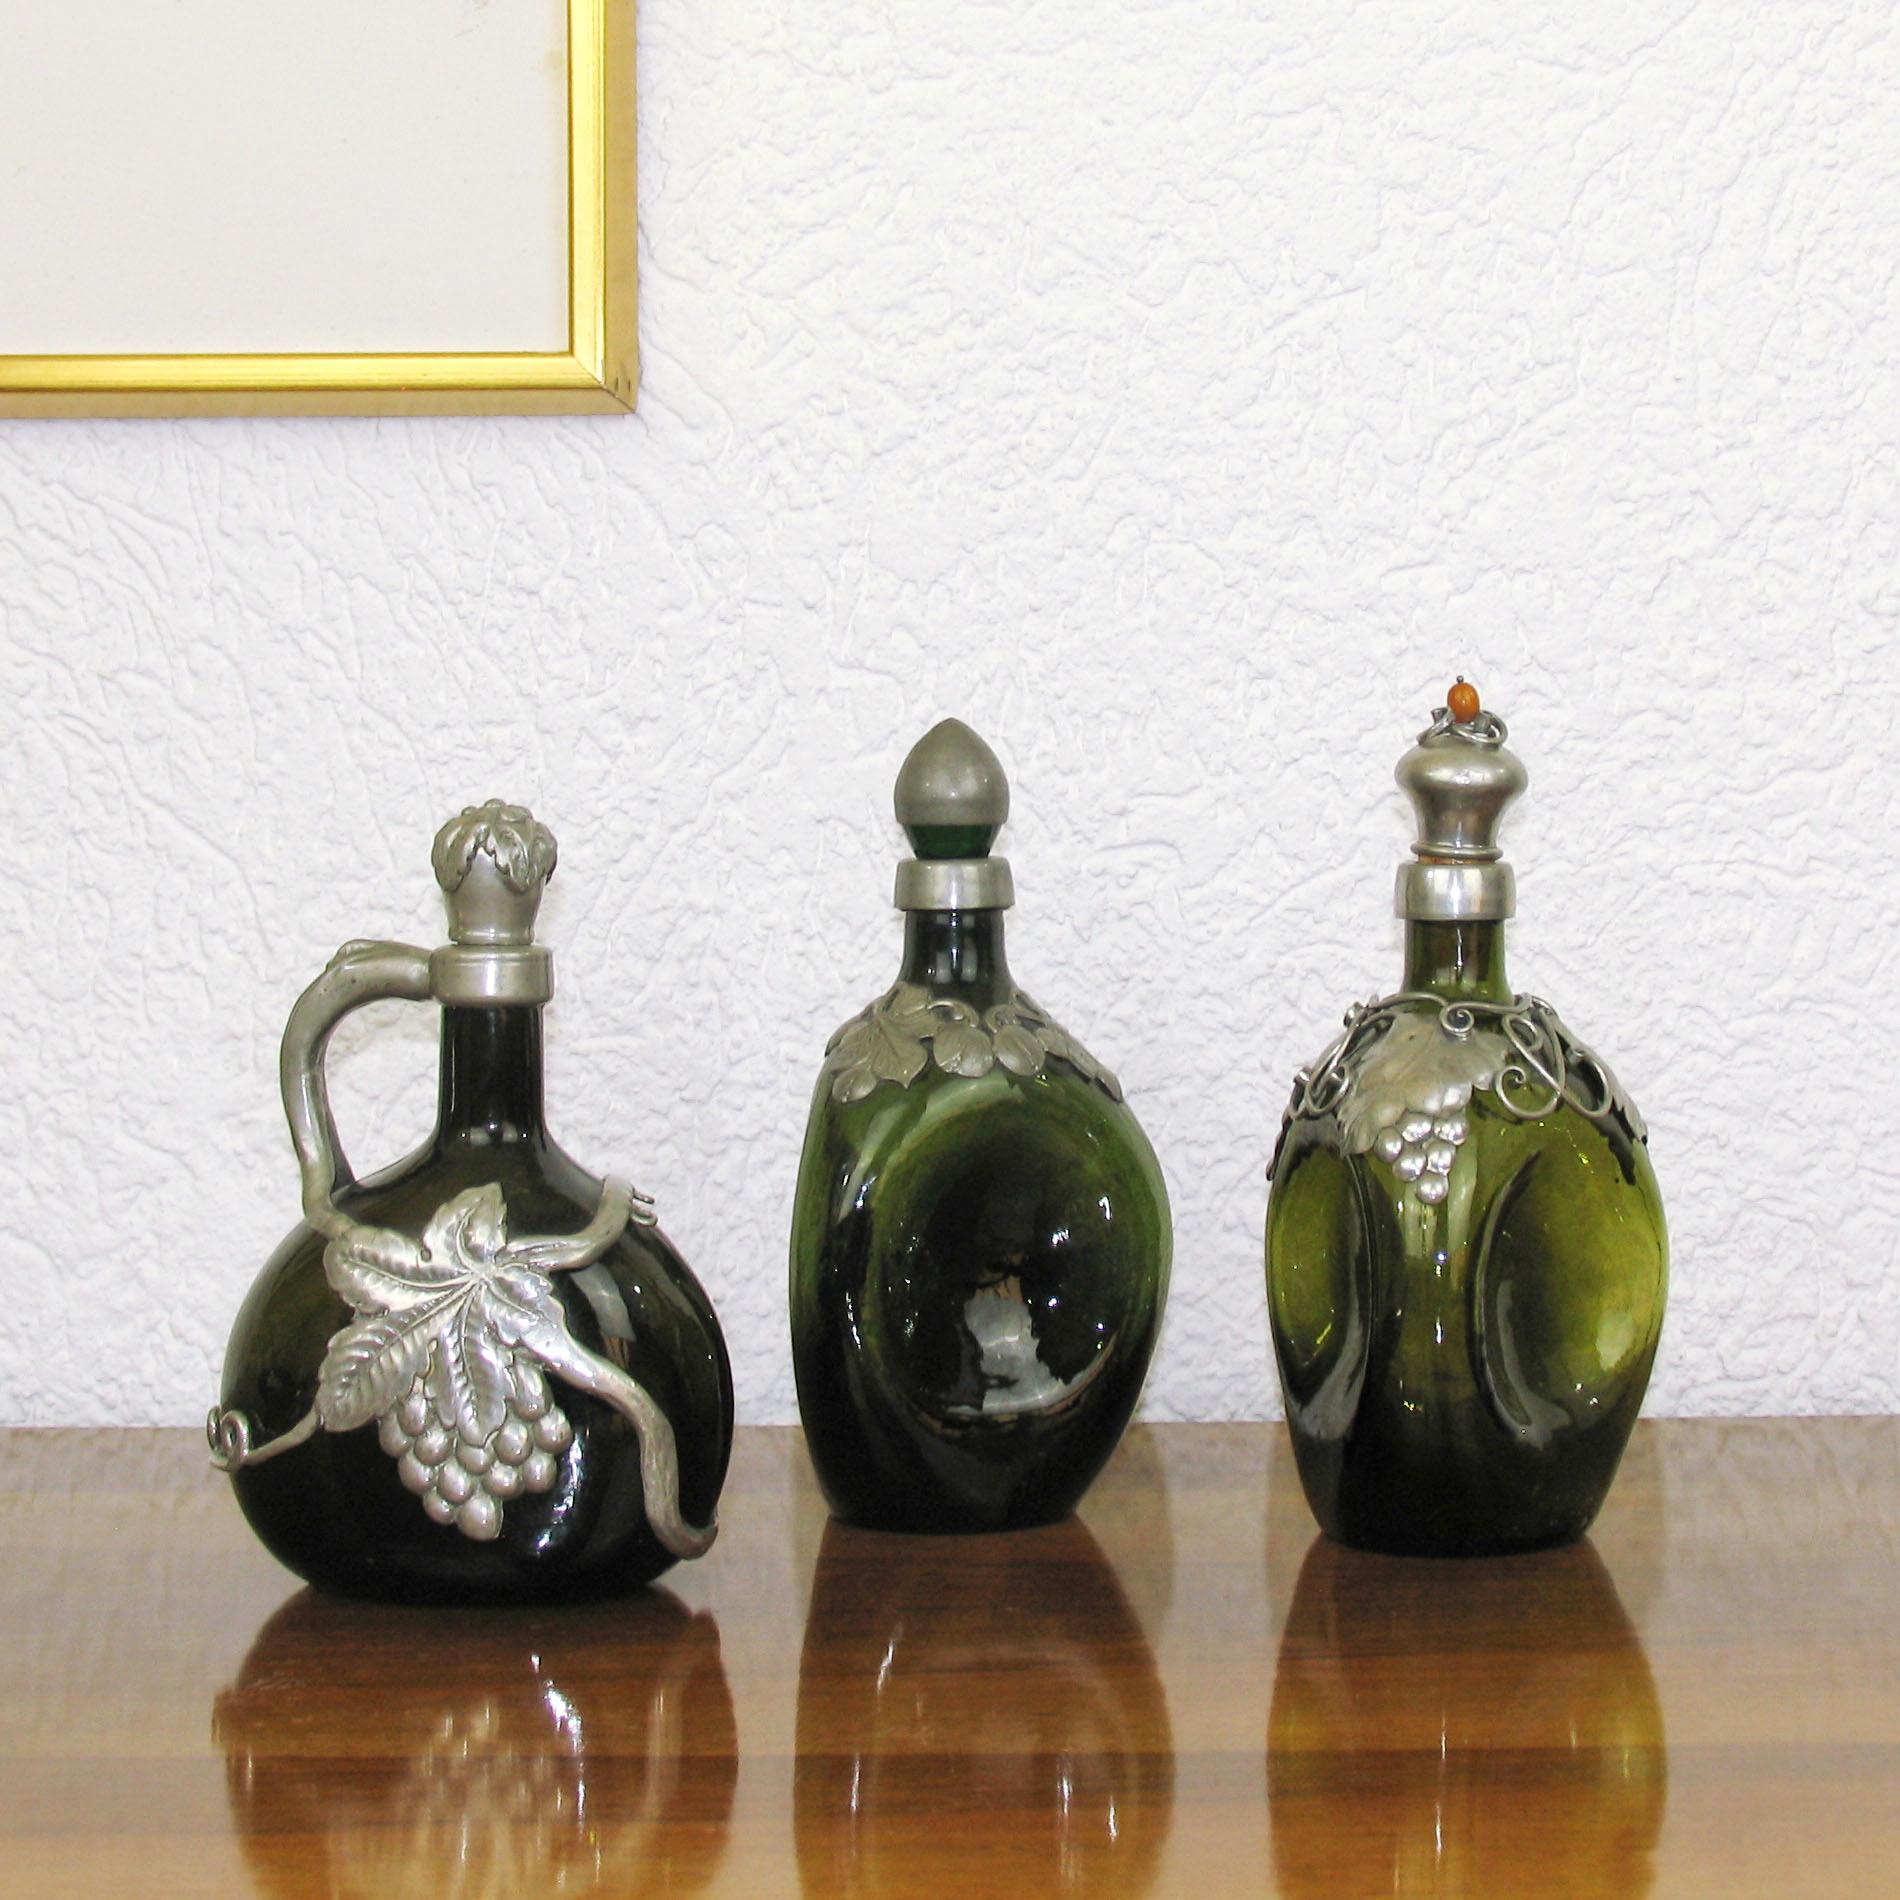 Early 20th Century Set of Three Jugendstil Danish Glass and Pewter Decanters